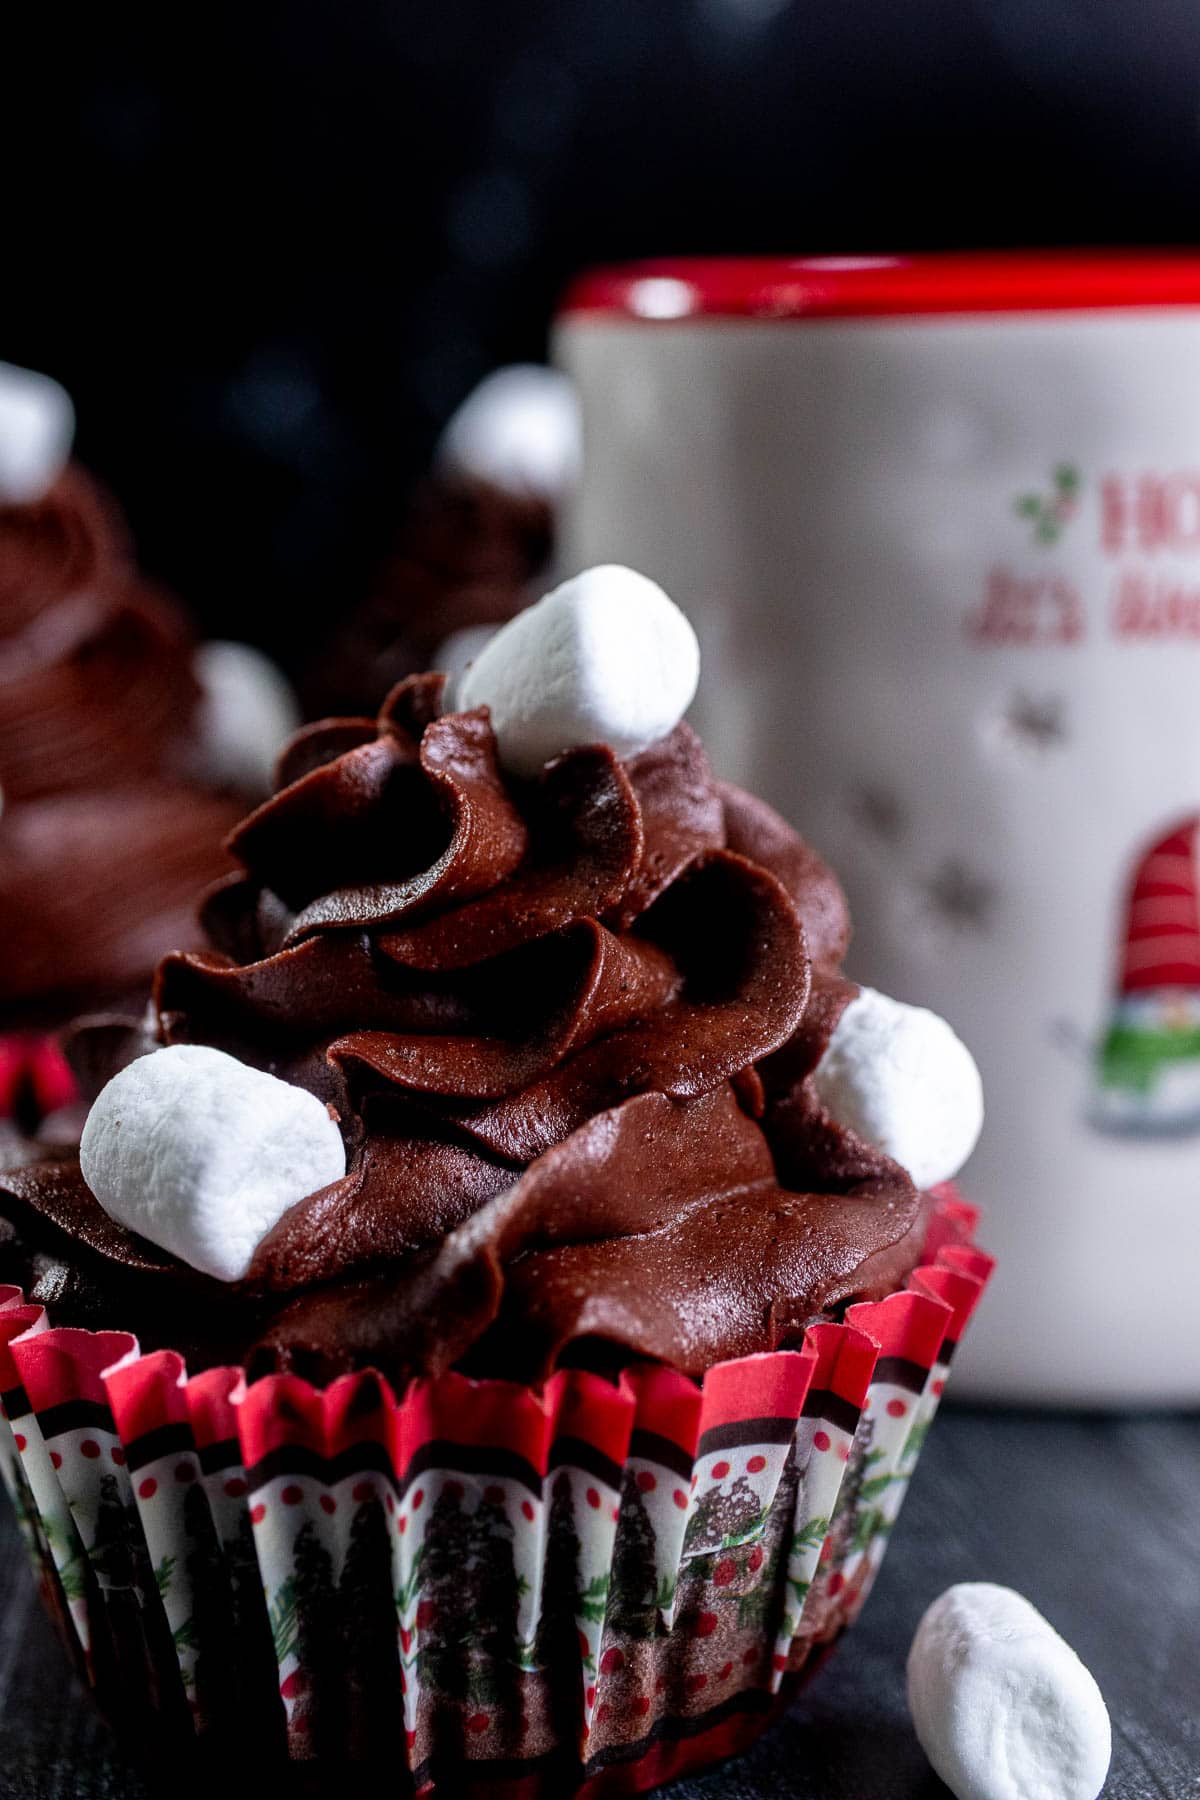 Close up of a hot chocolate cupcake with mini marshmallows on top and in front of a mug of hot chocolate.